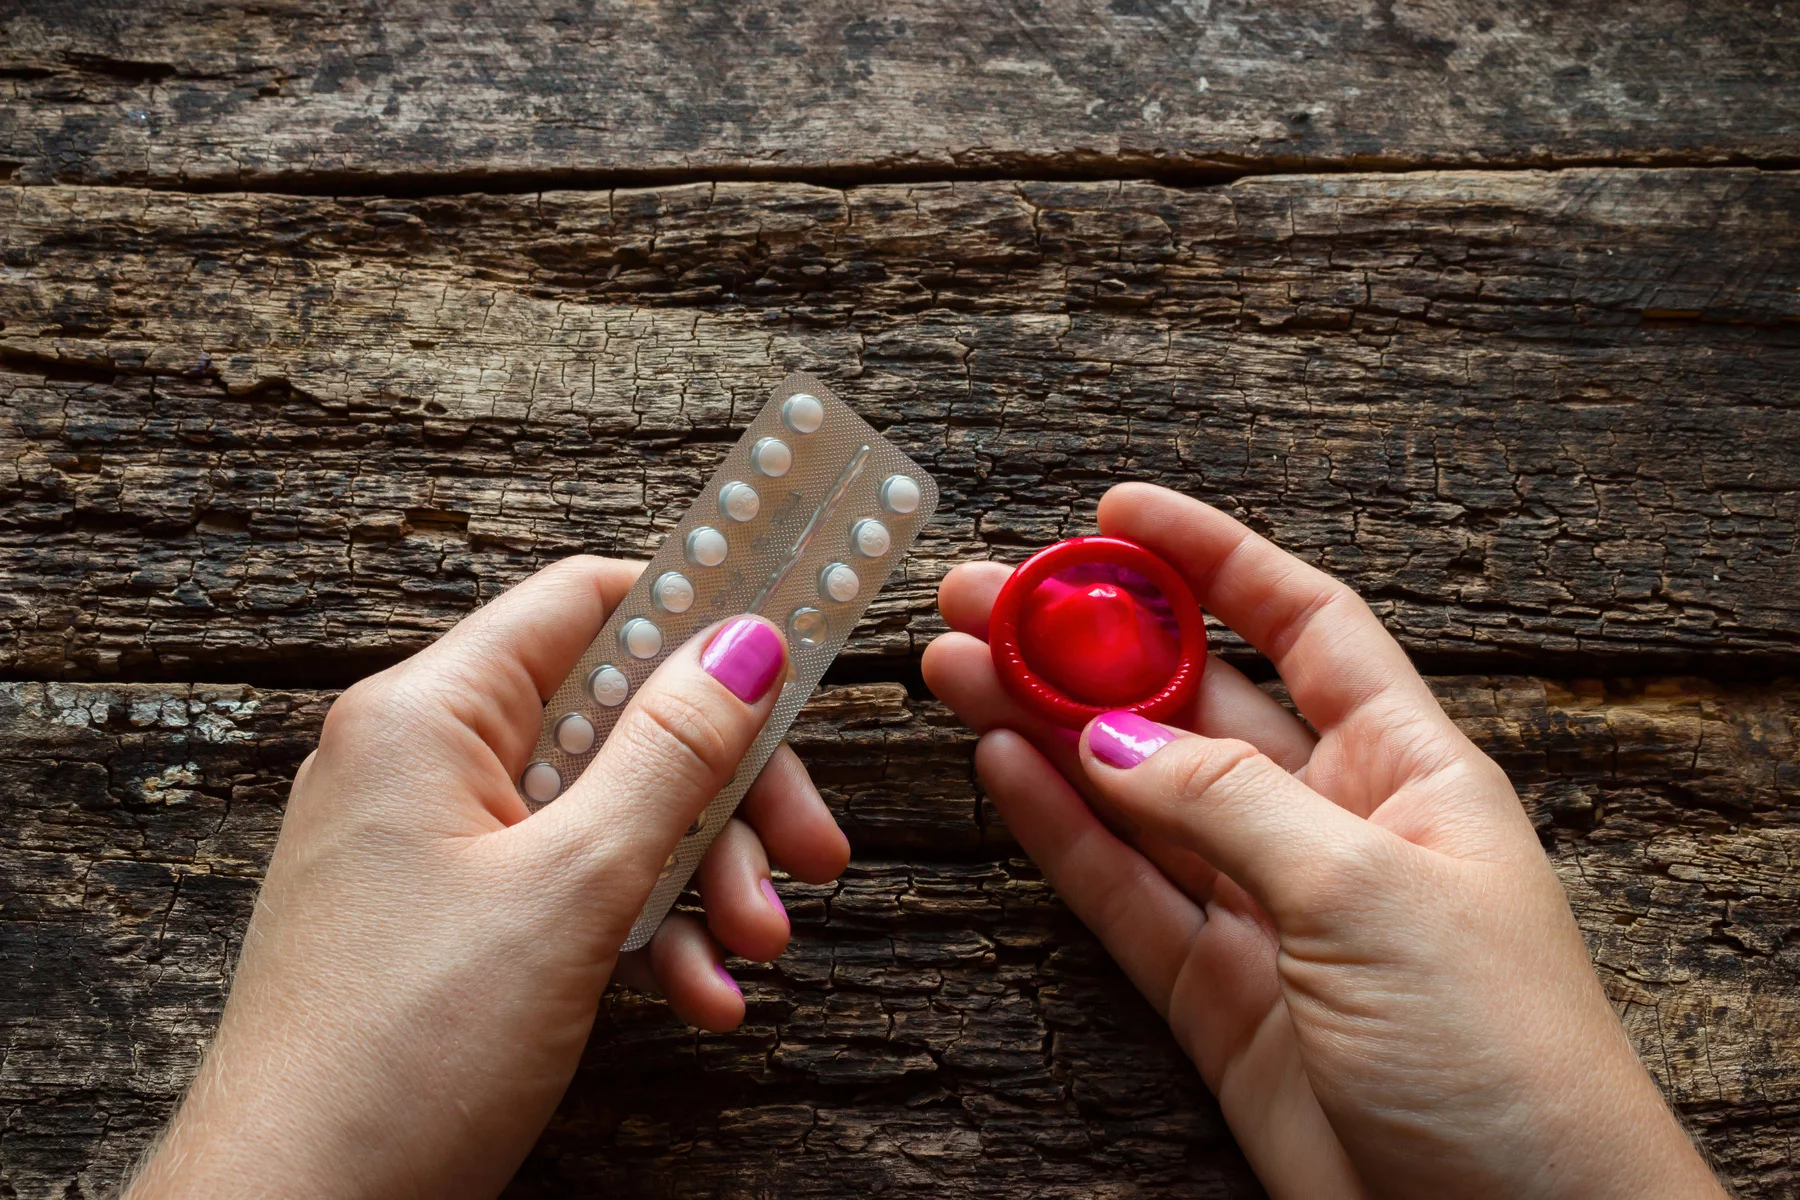 contraception: a woman holding two forms of birth control, a condom and the pill